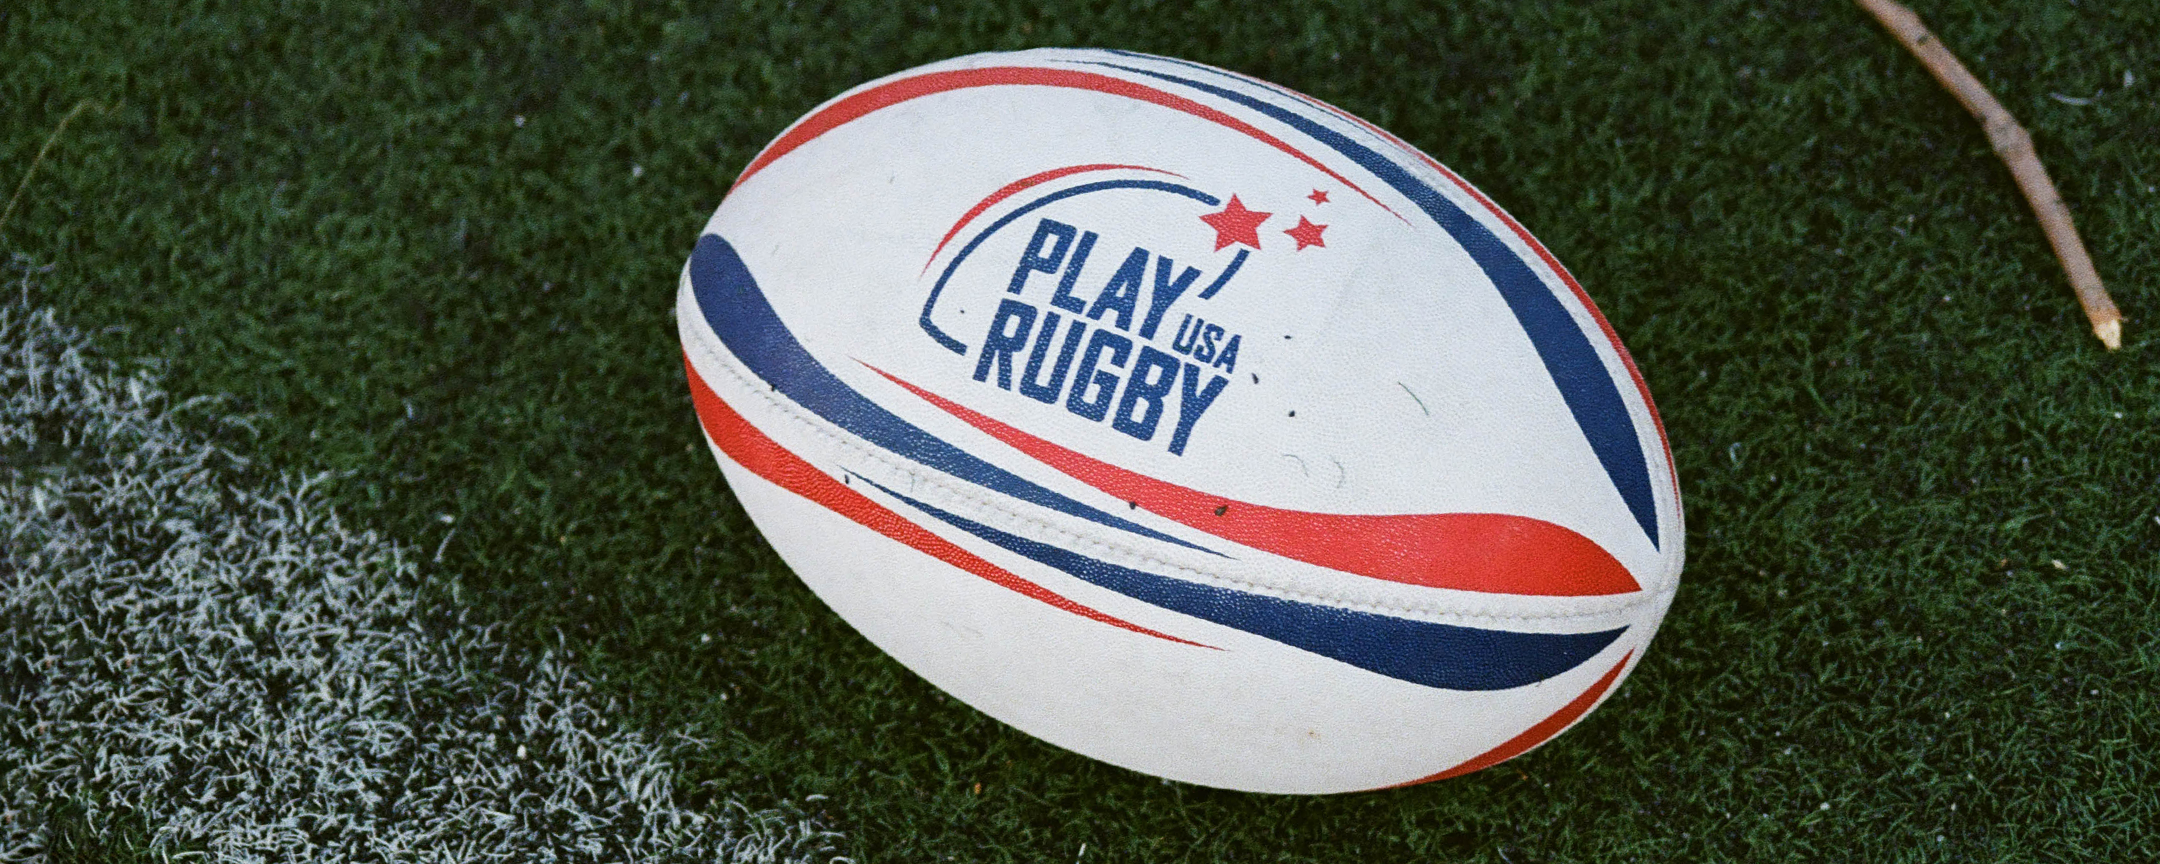 Giving Tuesday x Play Rugby USA